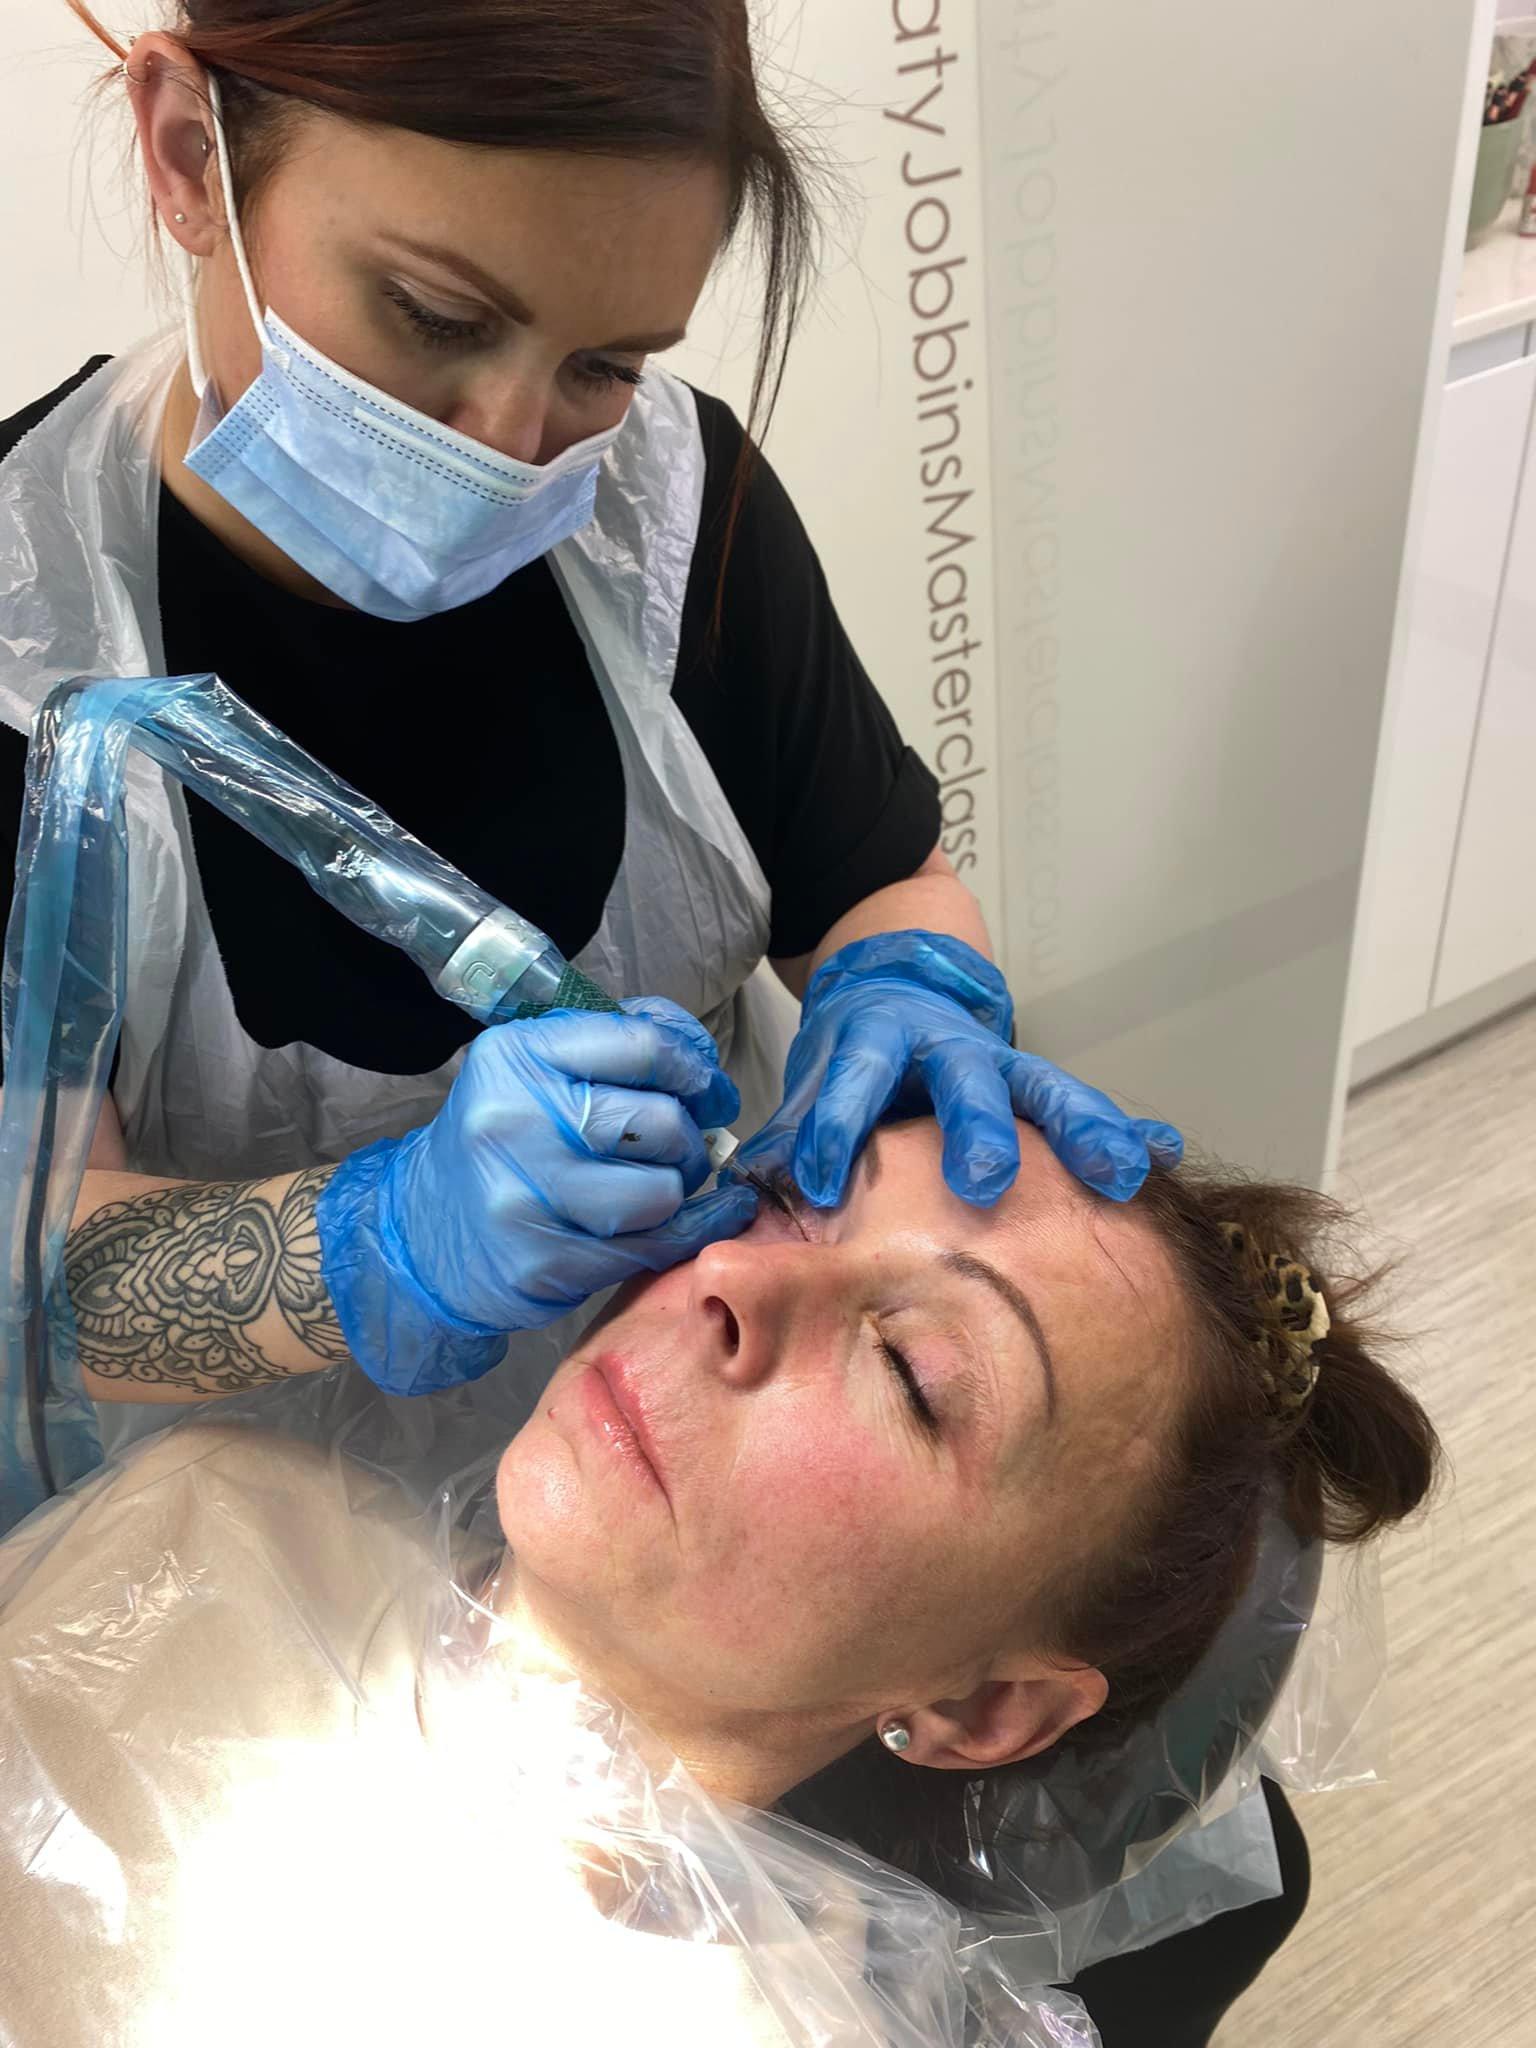 Lori-ann performing permanent eyeliner on a client